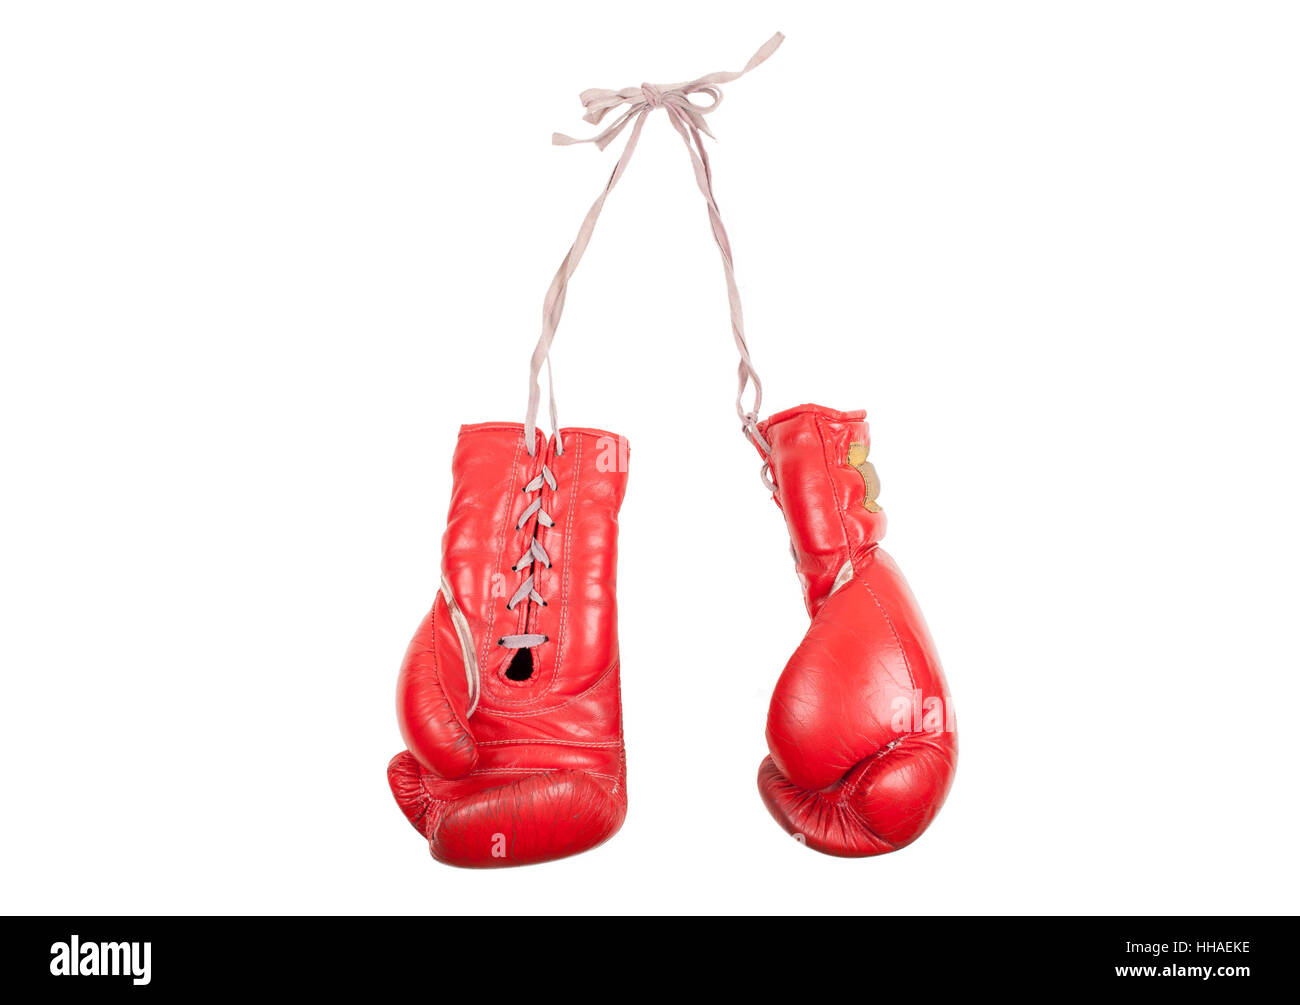 used and battered red leather boxing gloves, isolated on white background Stock Photo